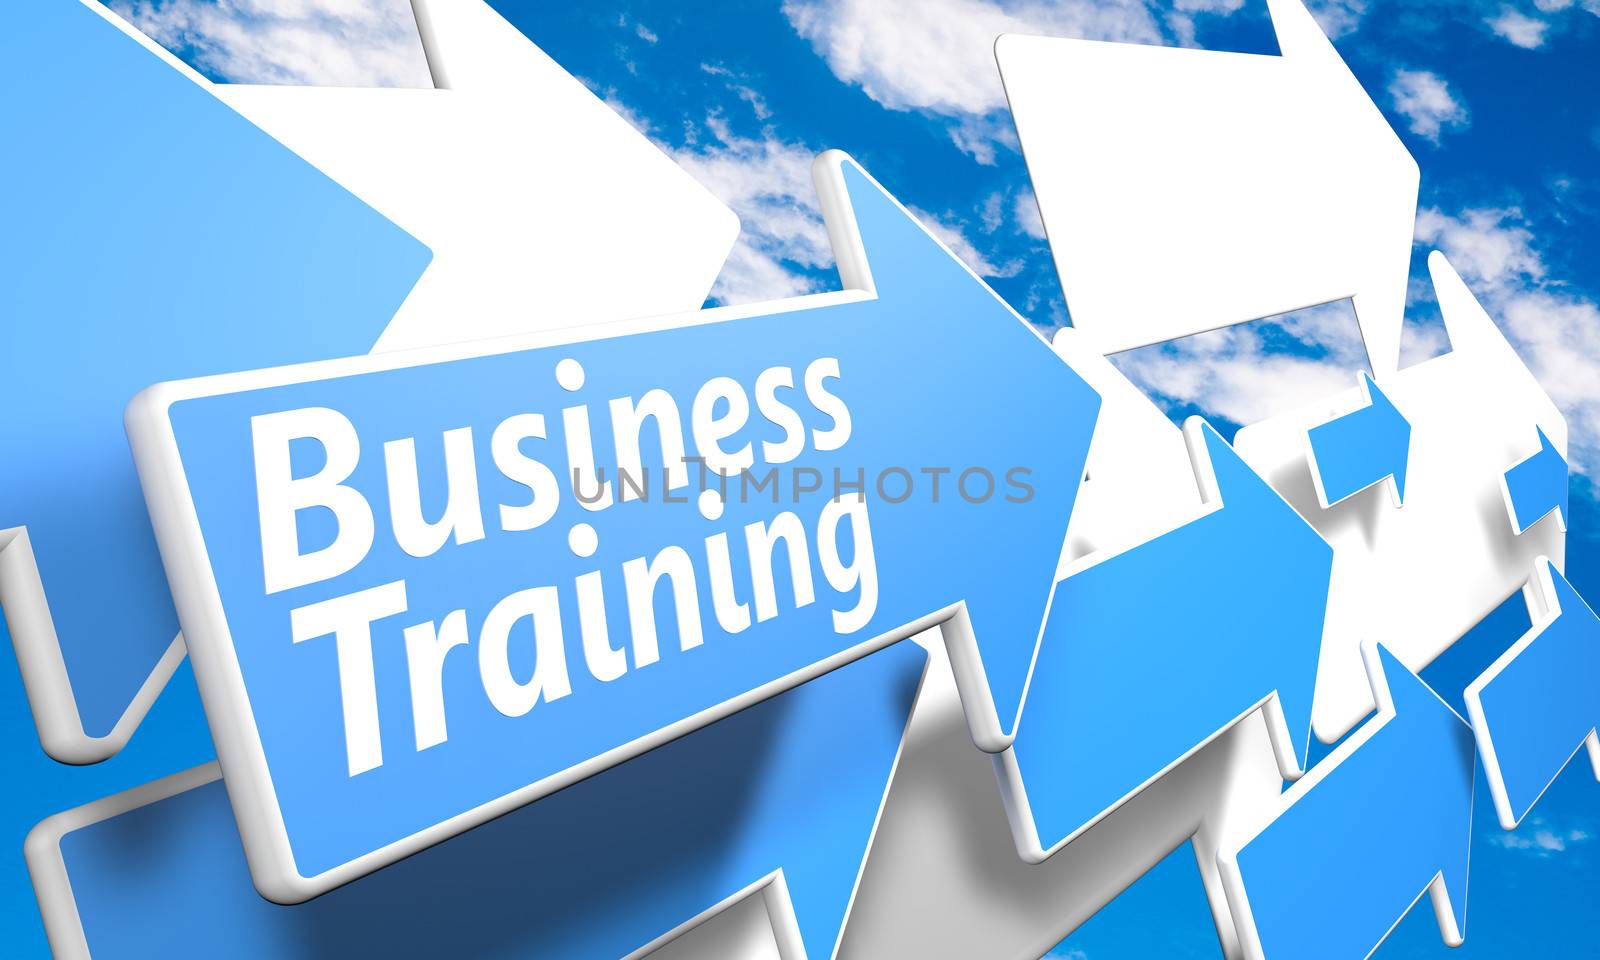 Business Training 3d render concept with blue and white arrows flying in a blue sky with clouds